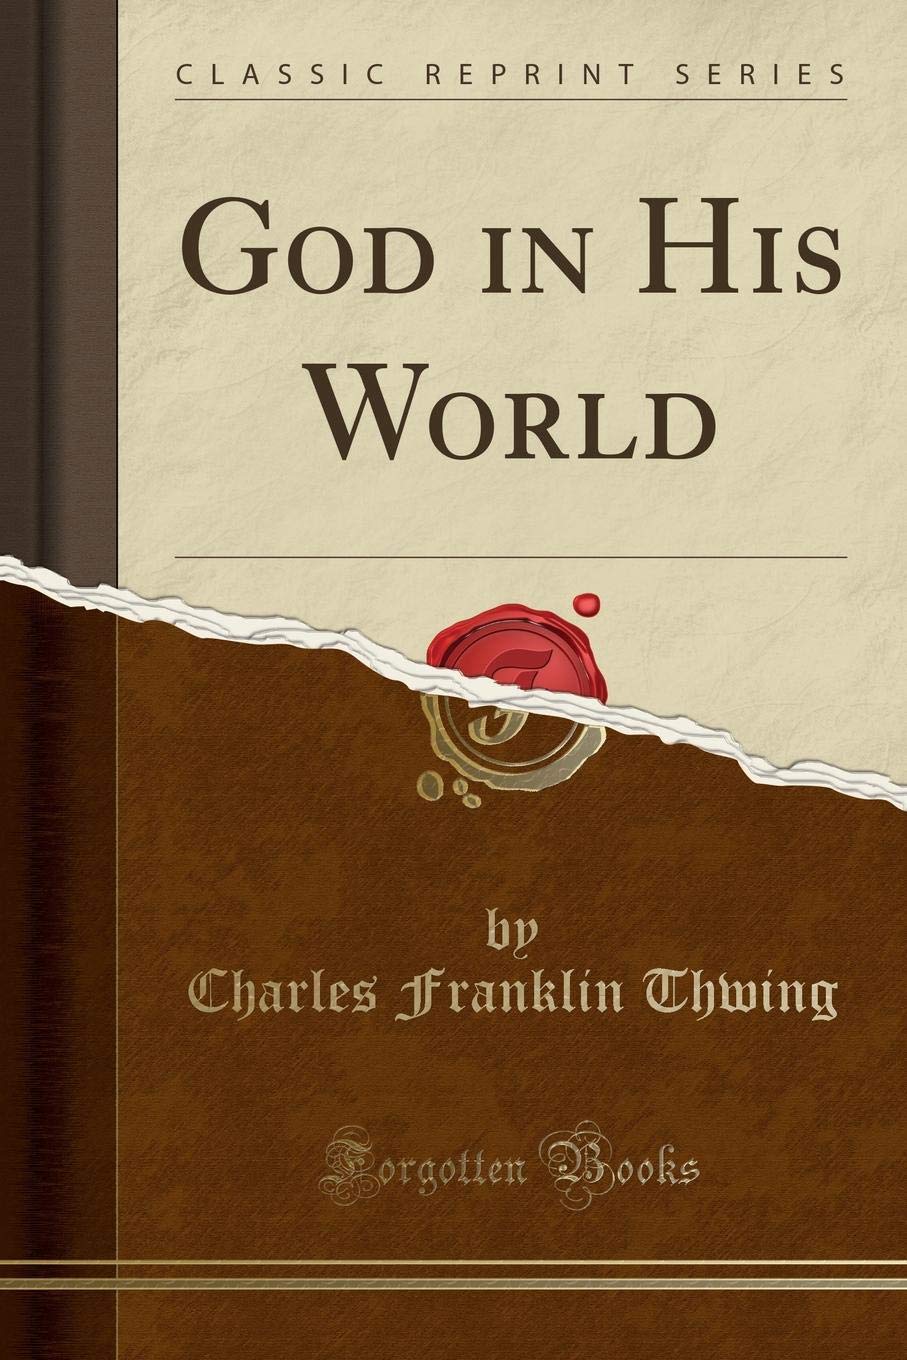 God in His World